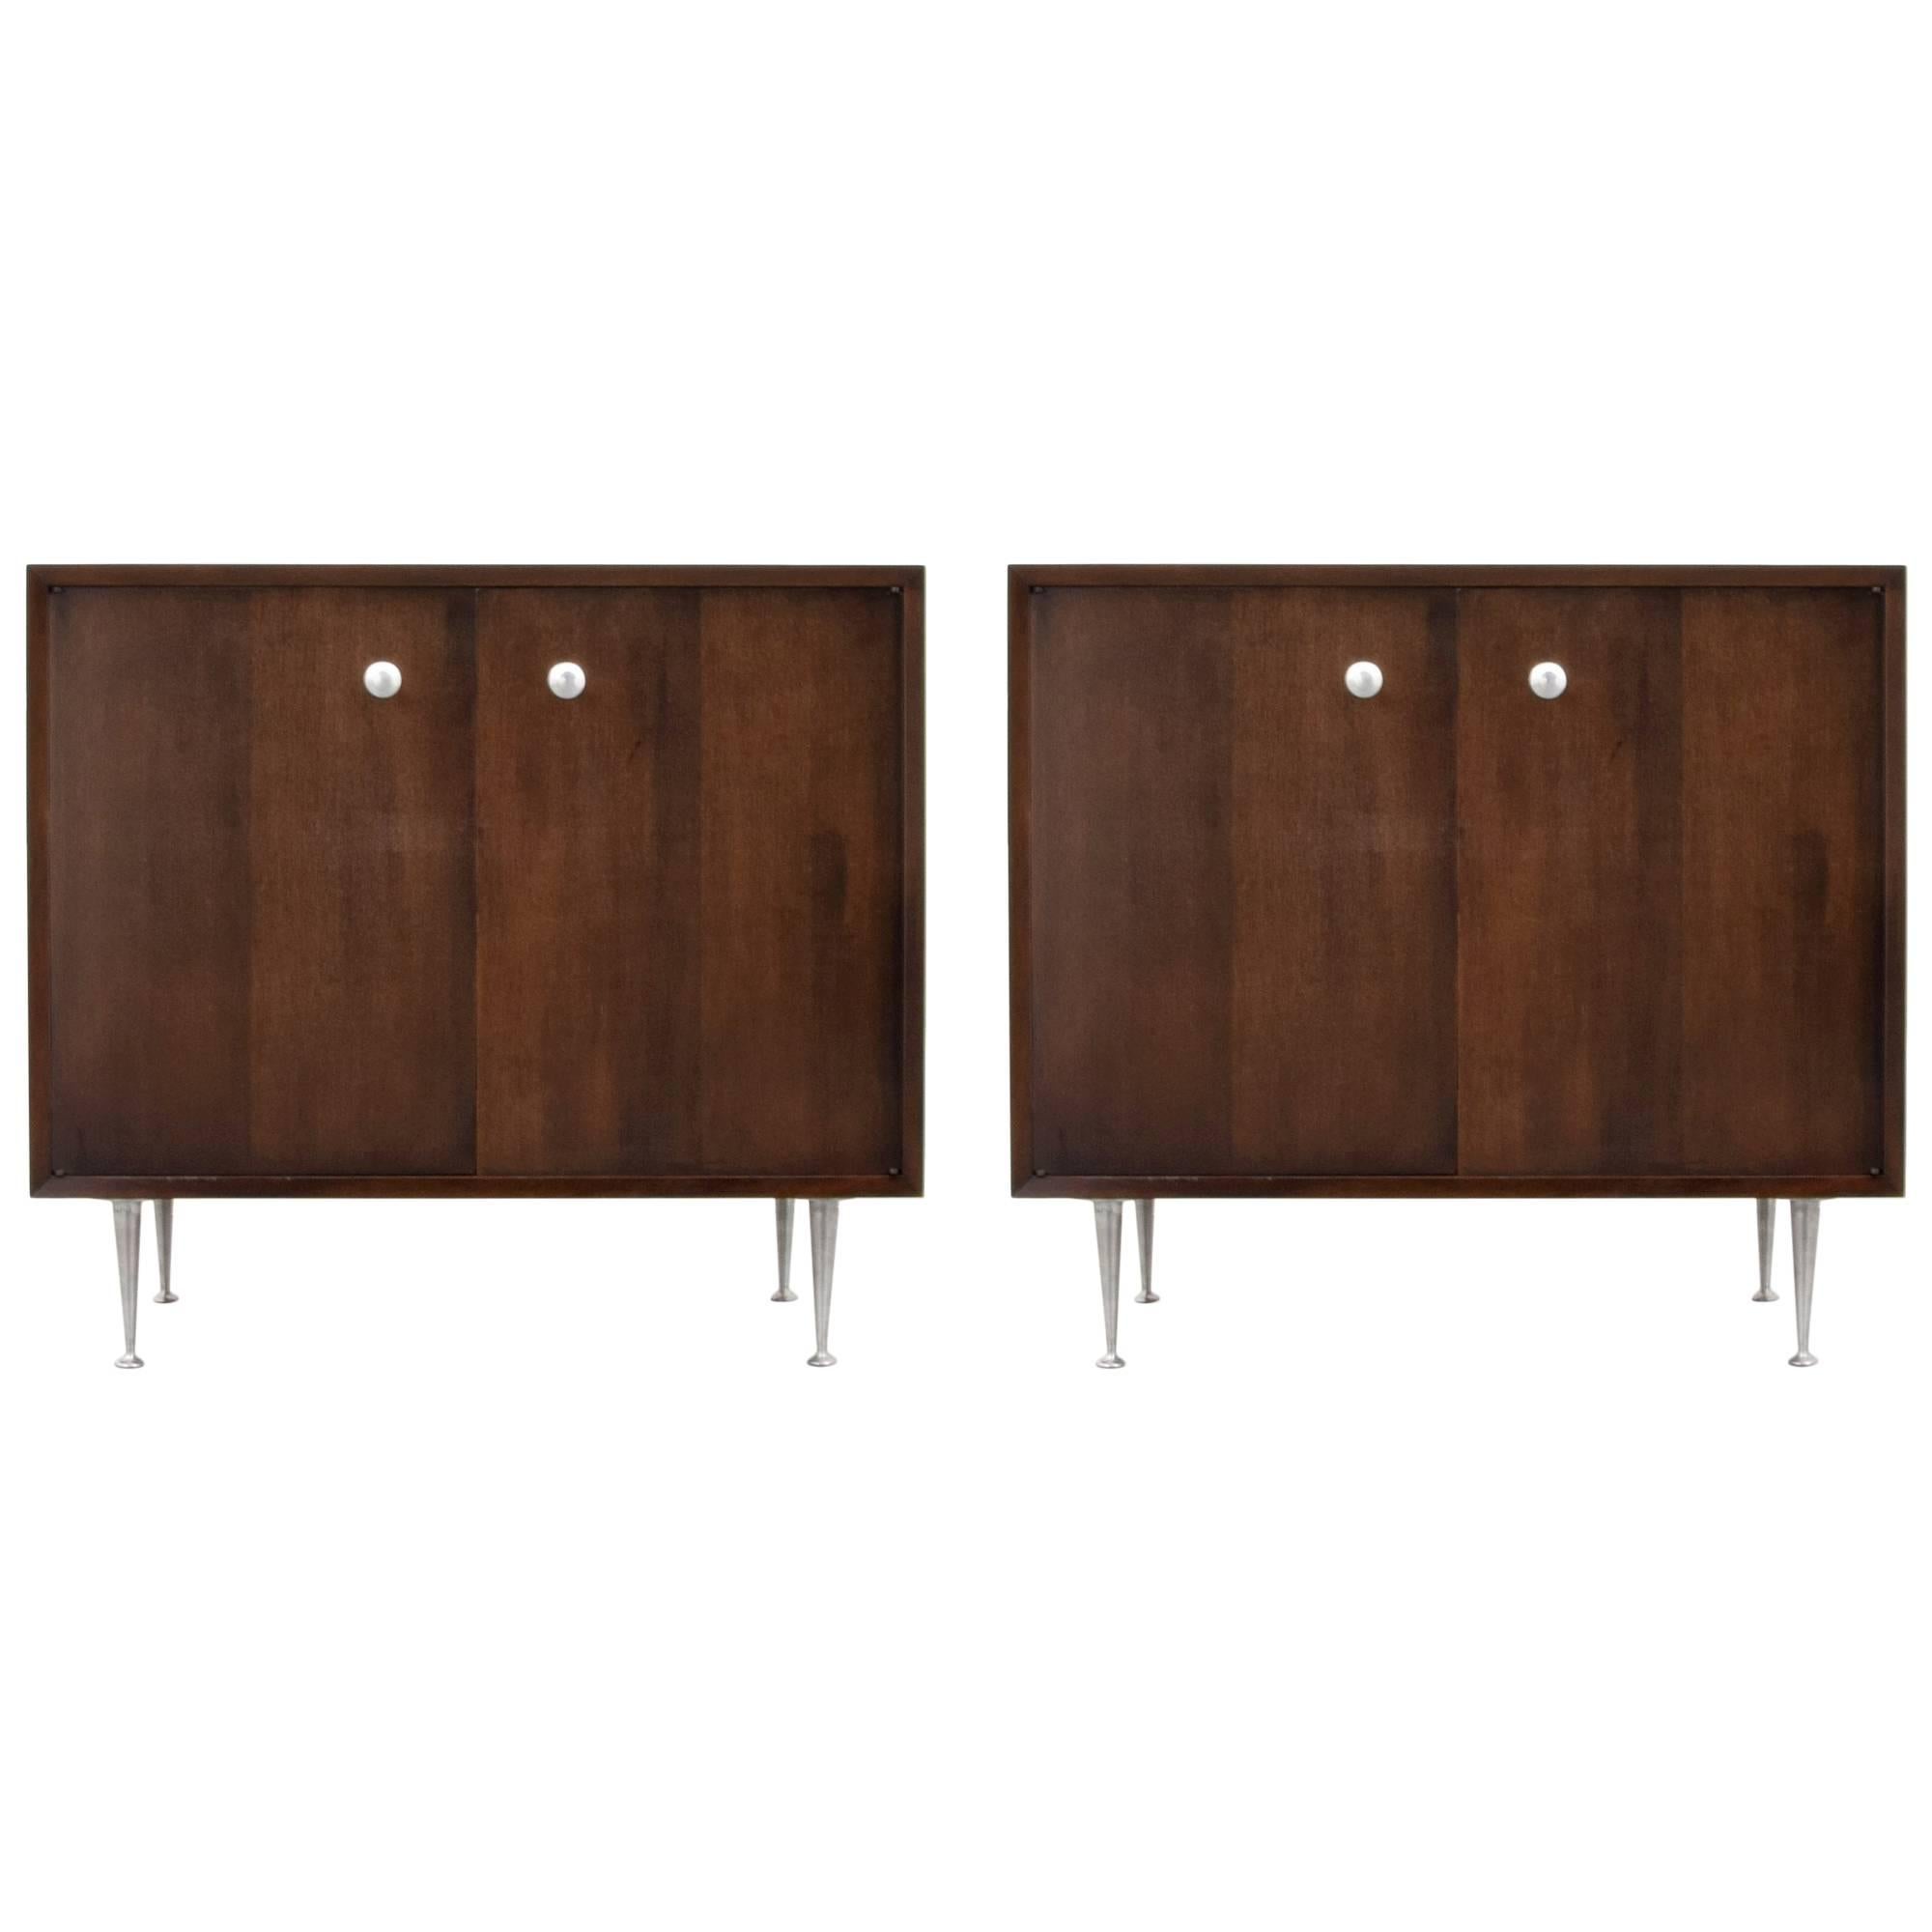 George Nelson "Thin Edge" Cabinets For Sale